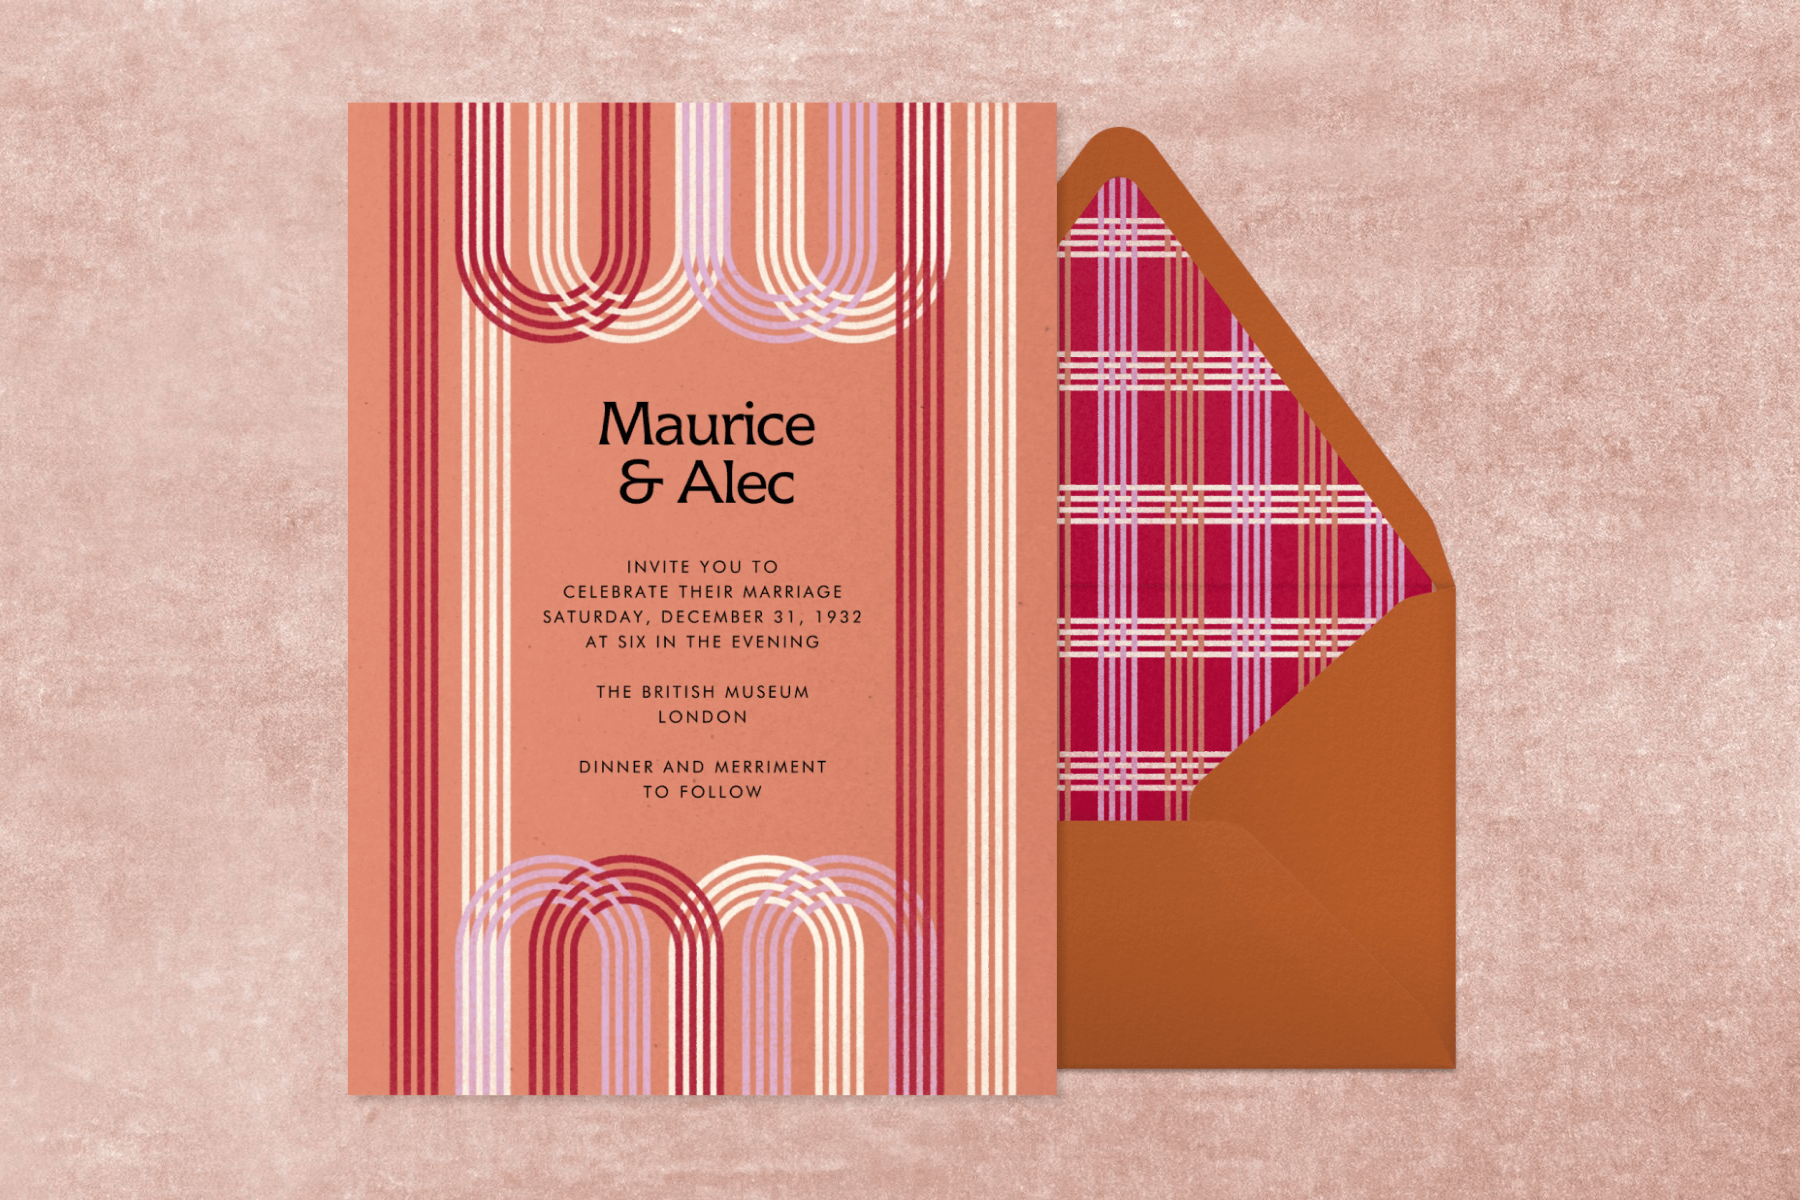 An orange wedding invitation with red, cream, and pink arches, paired with an envelope with a checked liner.